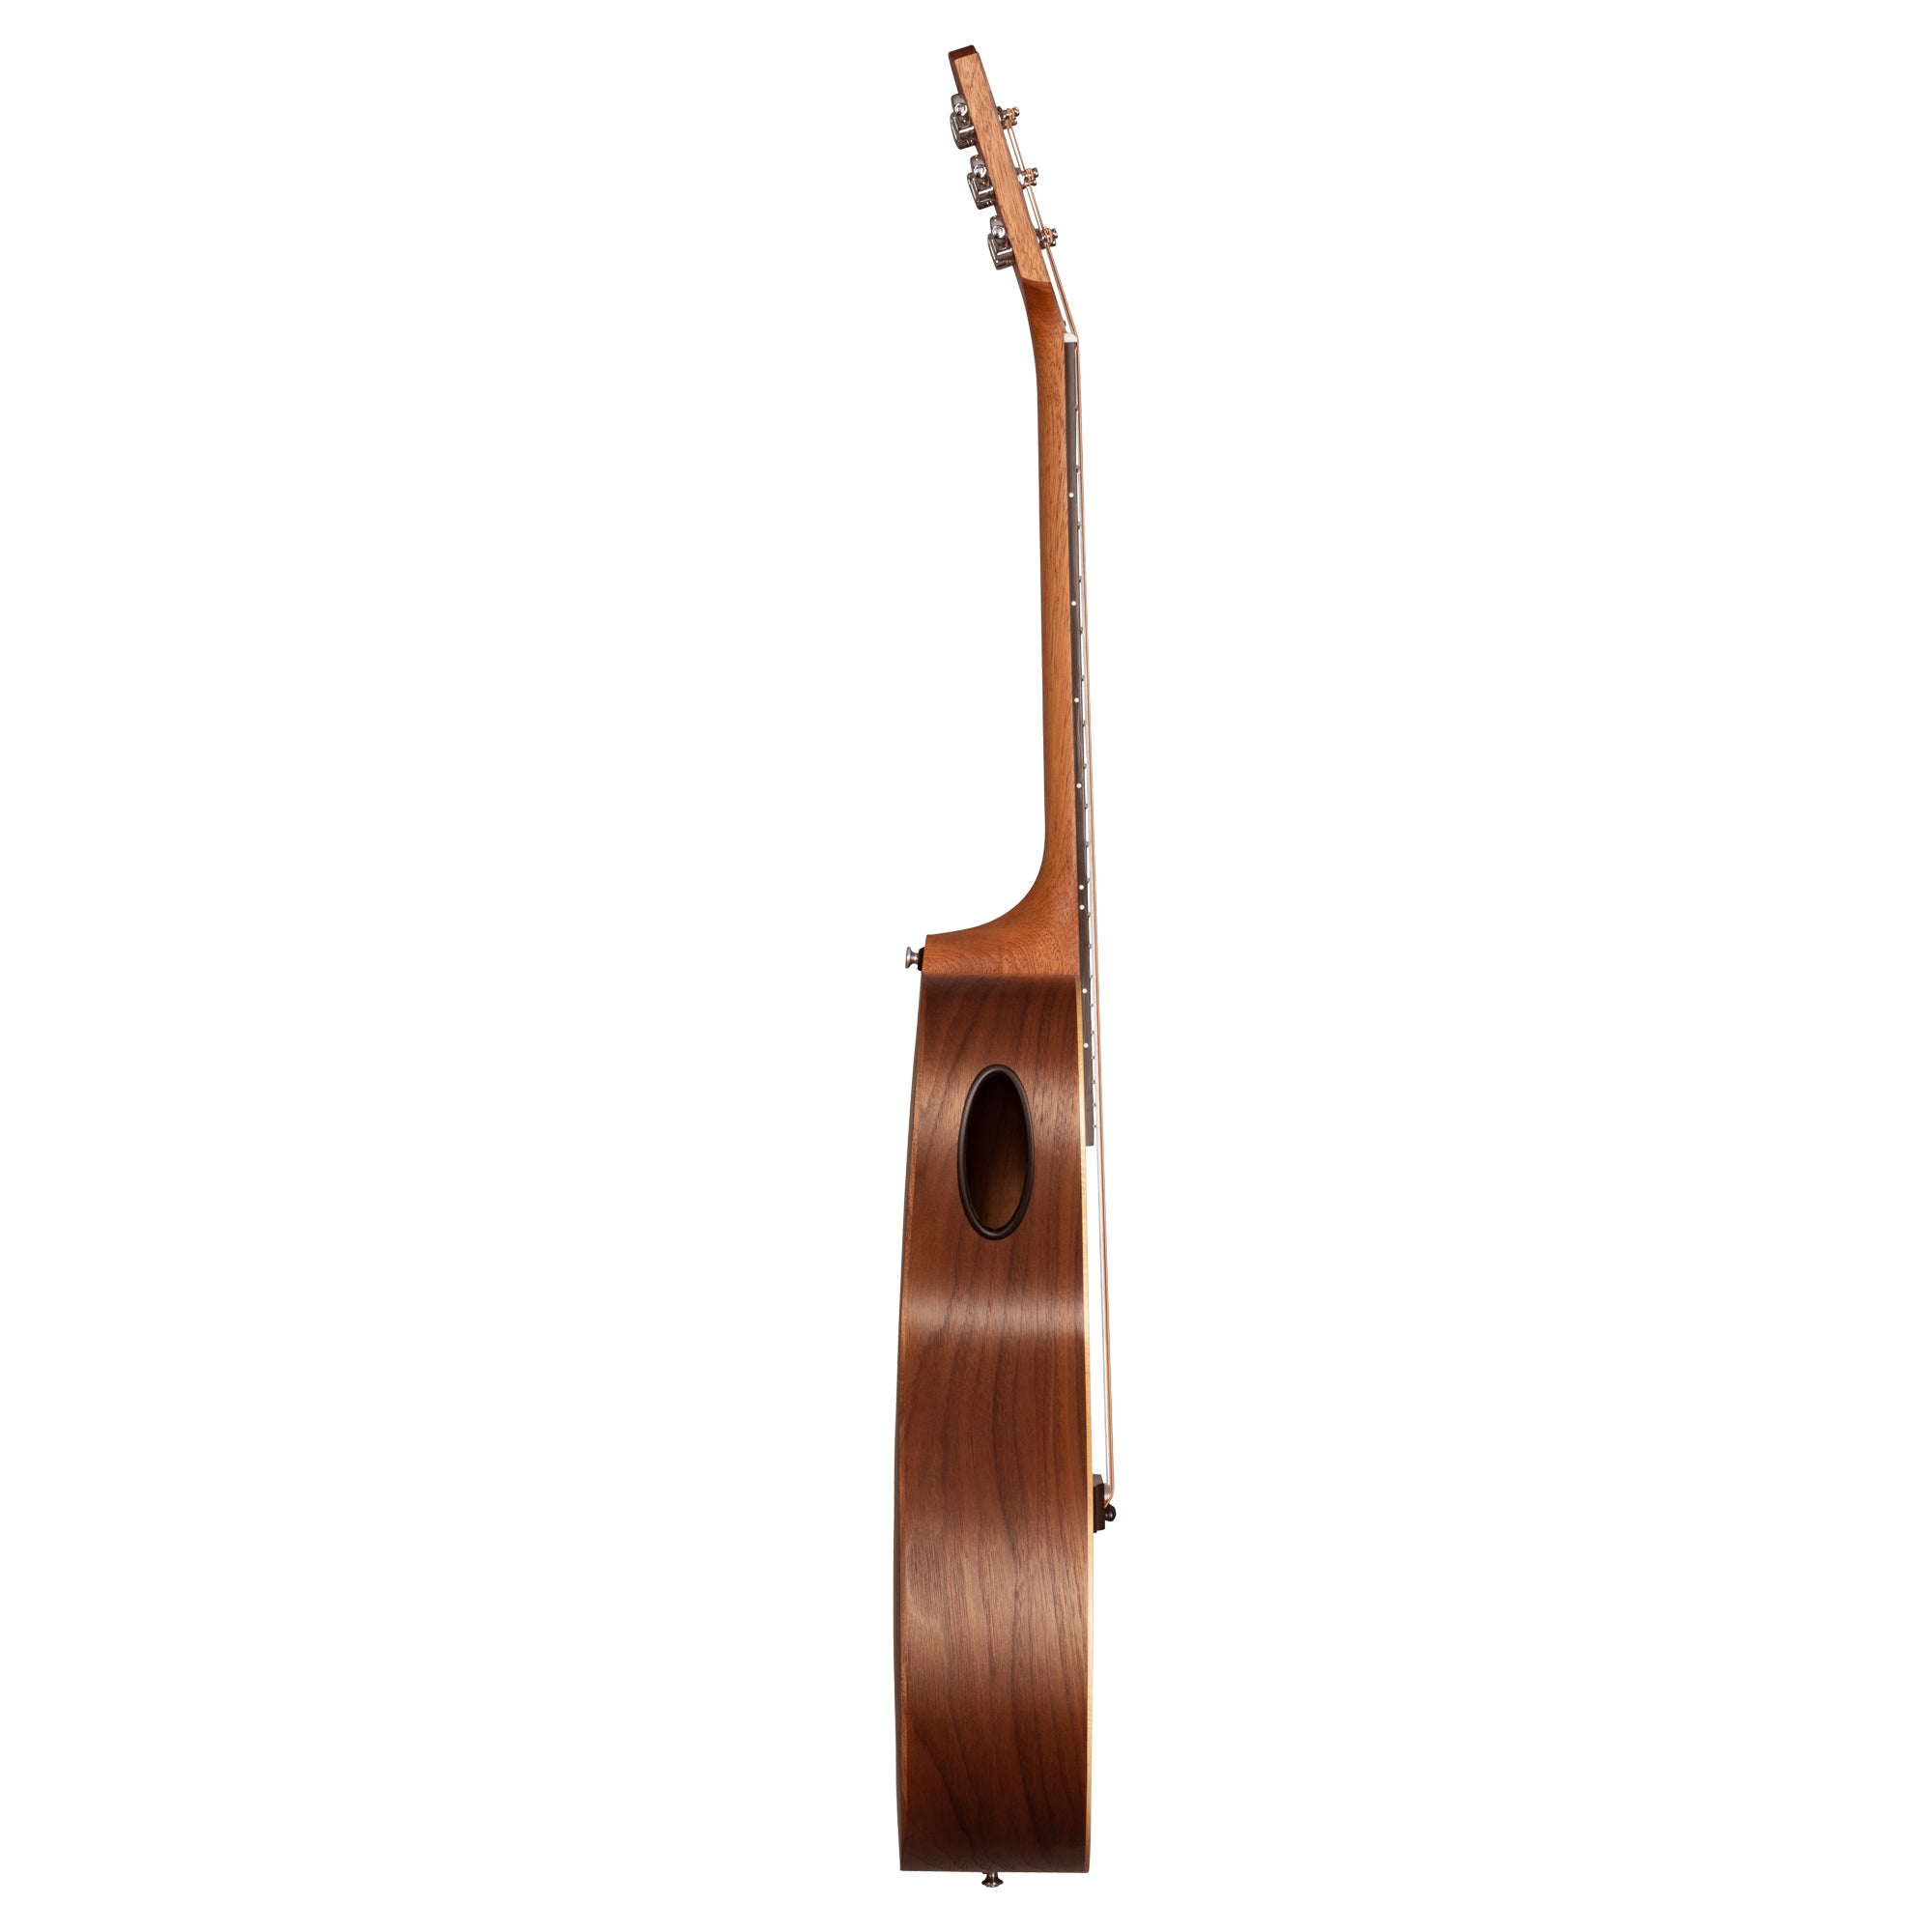 Gibson MCSBG0AN G-00 Generation™ Collection Natural Acoustic Guitar